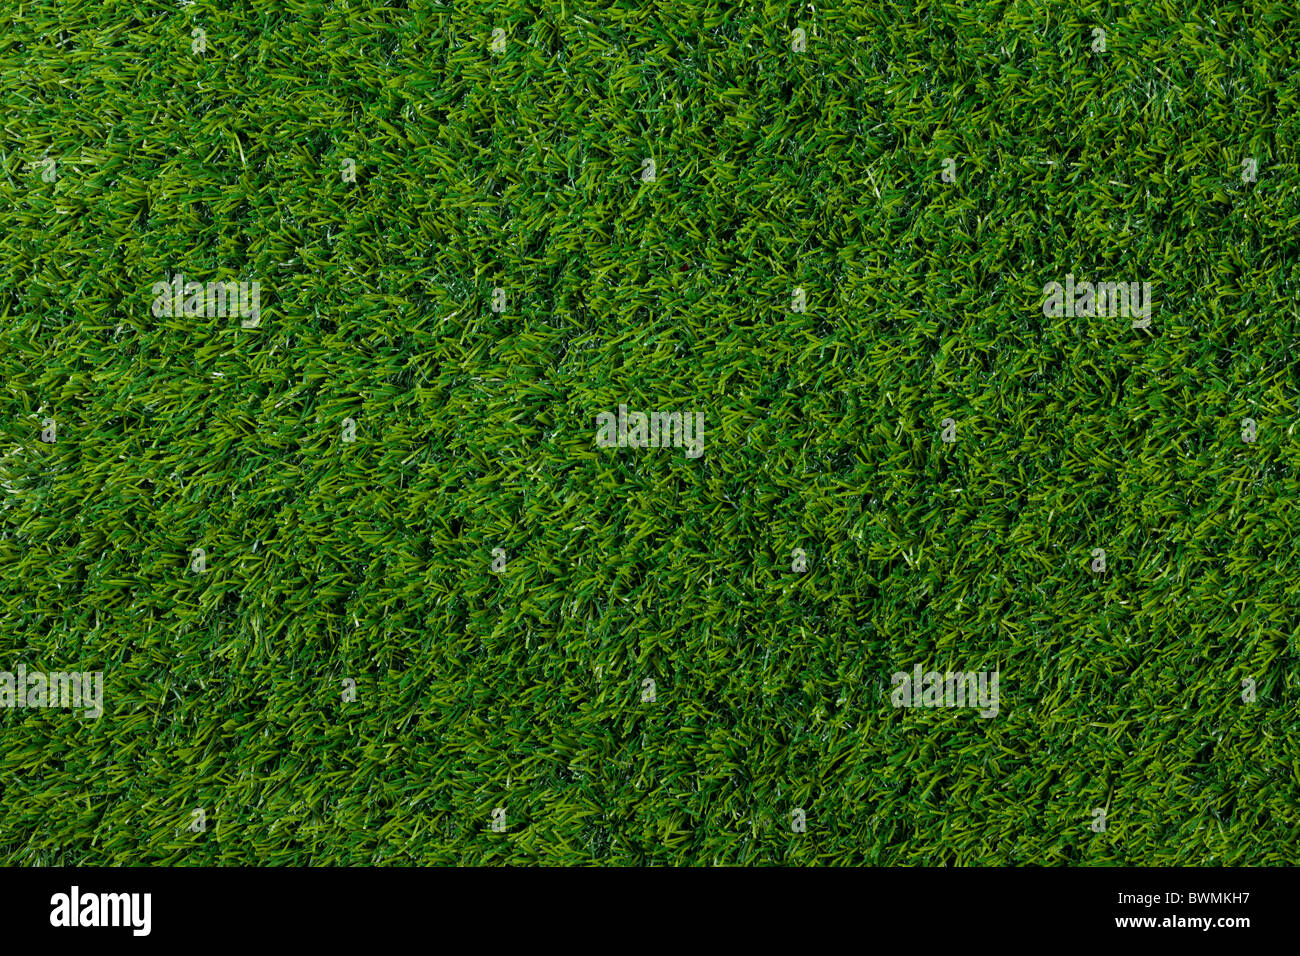 Photo of grass for background use. Stock Photo